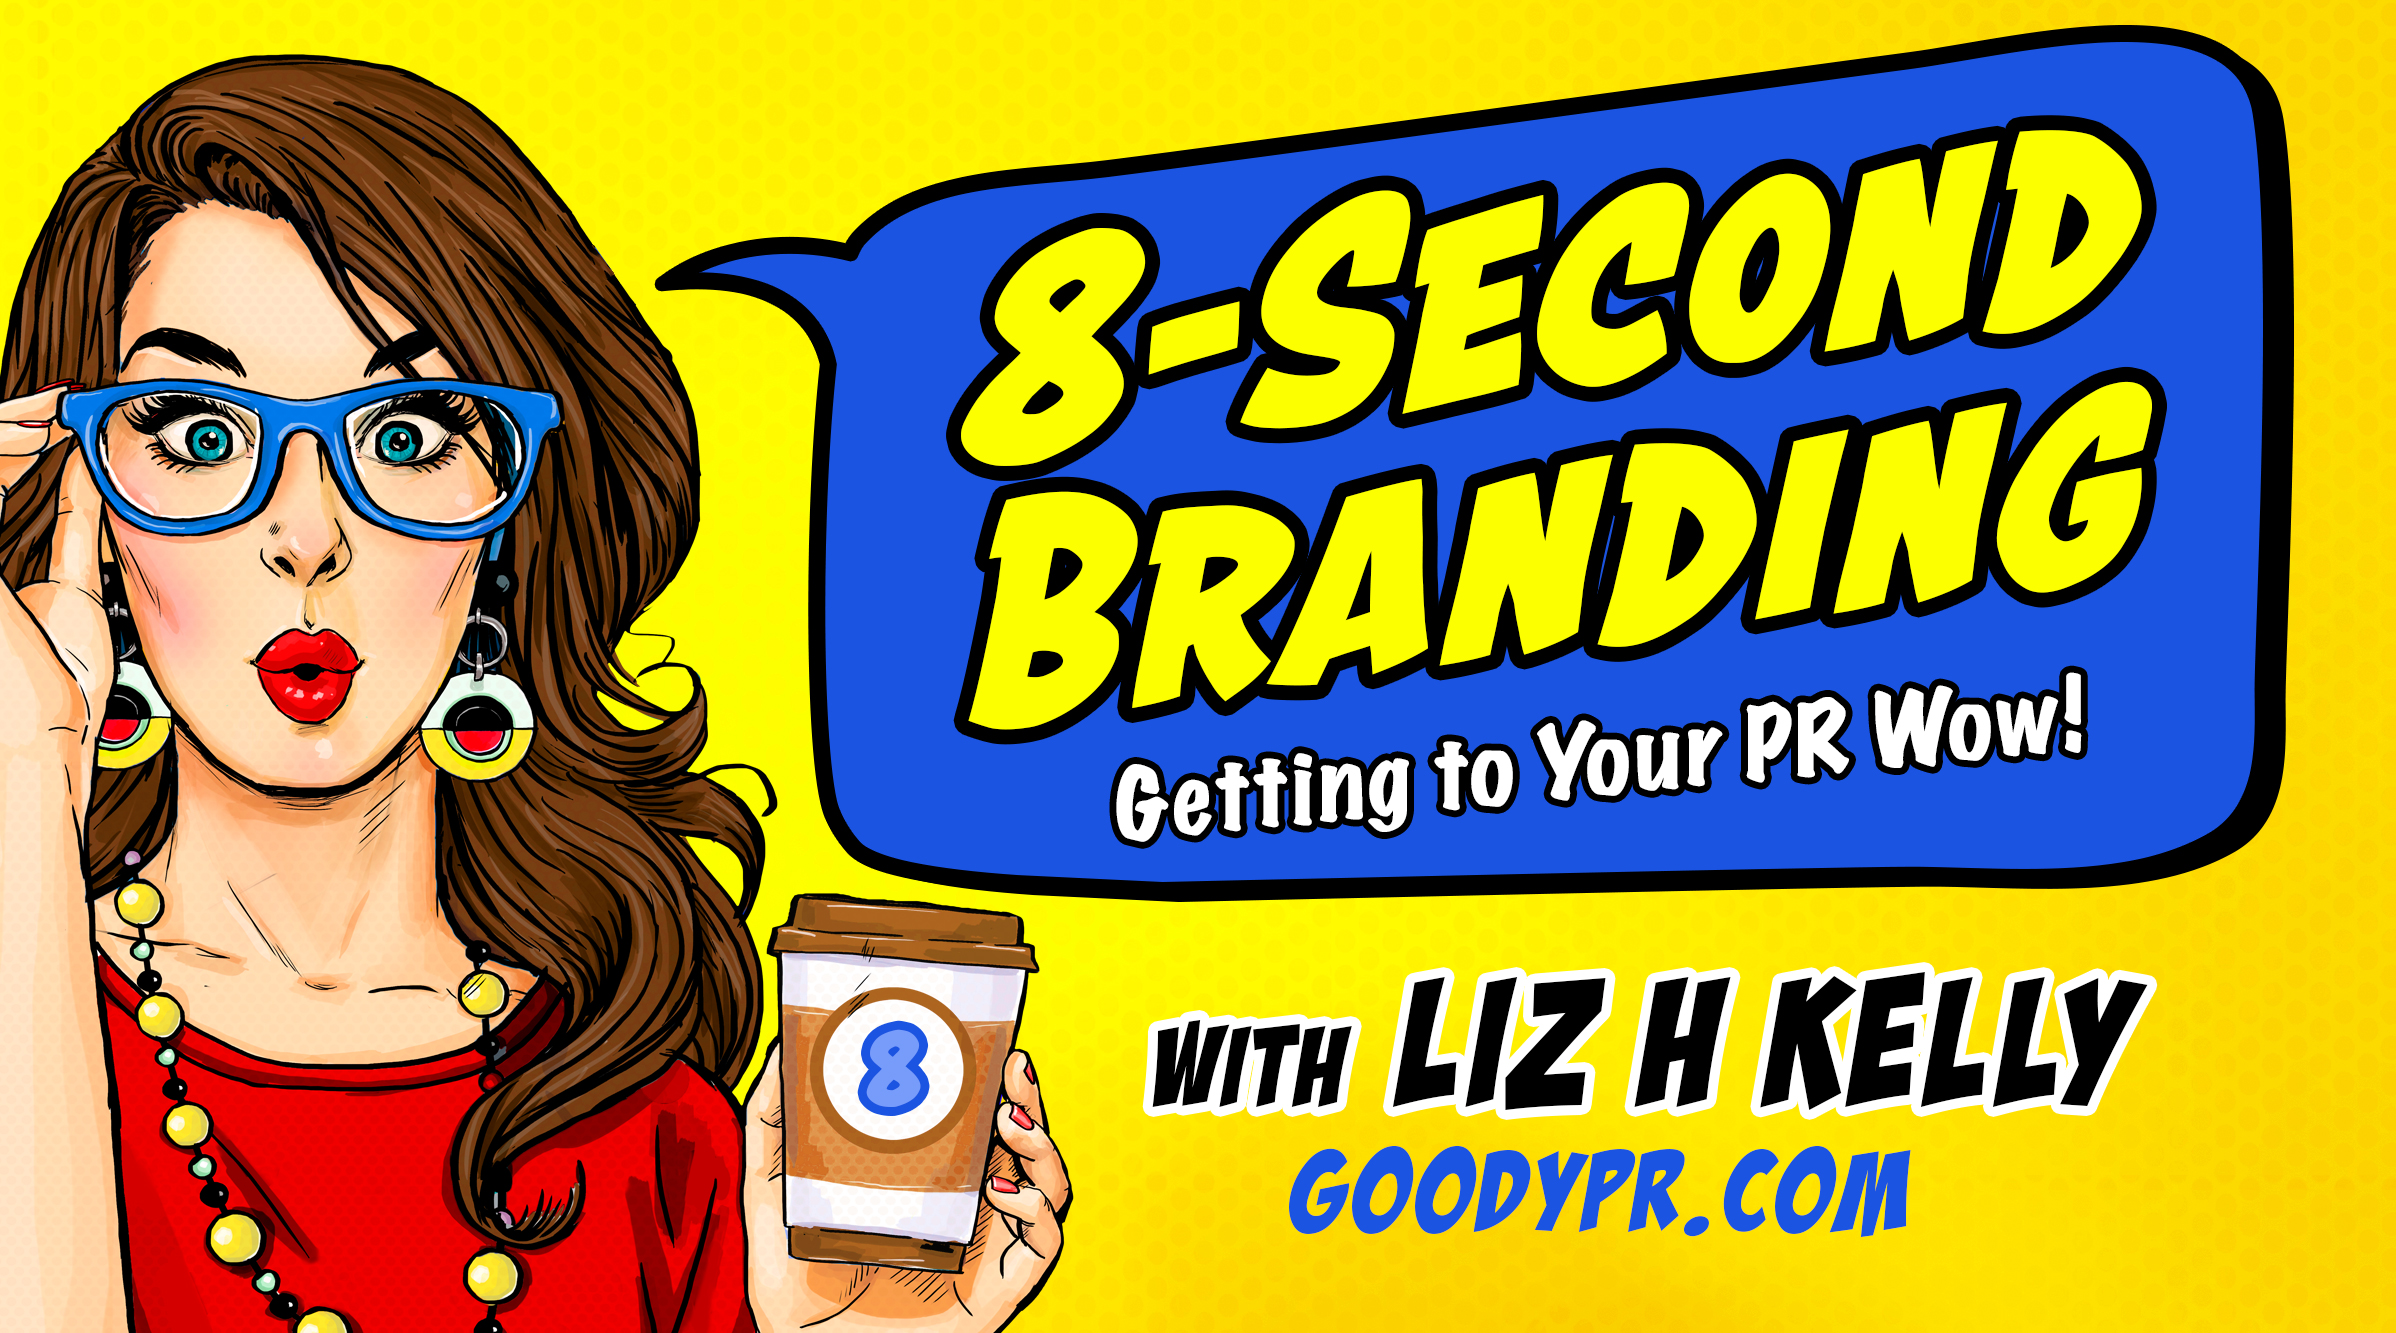 8-Second Branding - Getting to Your PR Wow with Host Liz H Kelly airs on VoiceAmerica Business Channel and all major podcast platforms